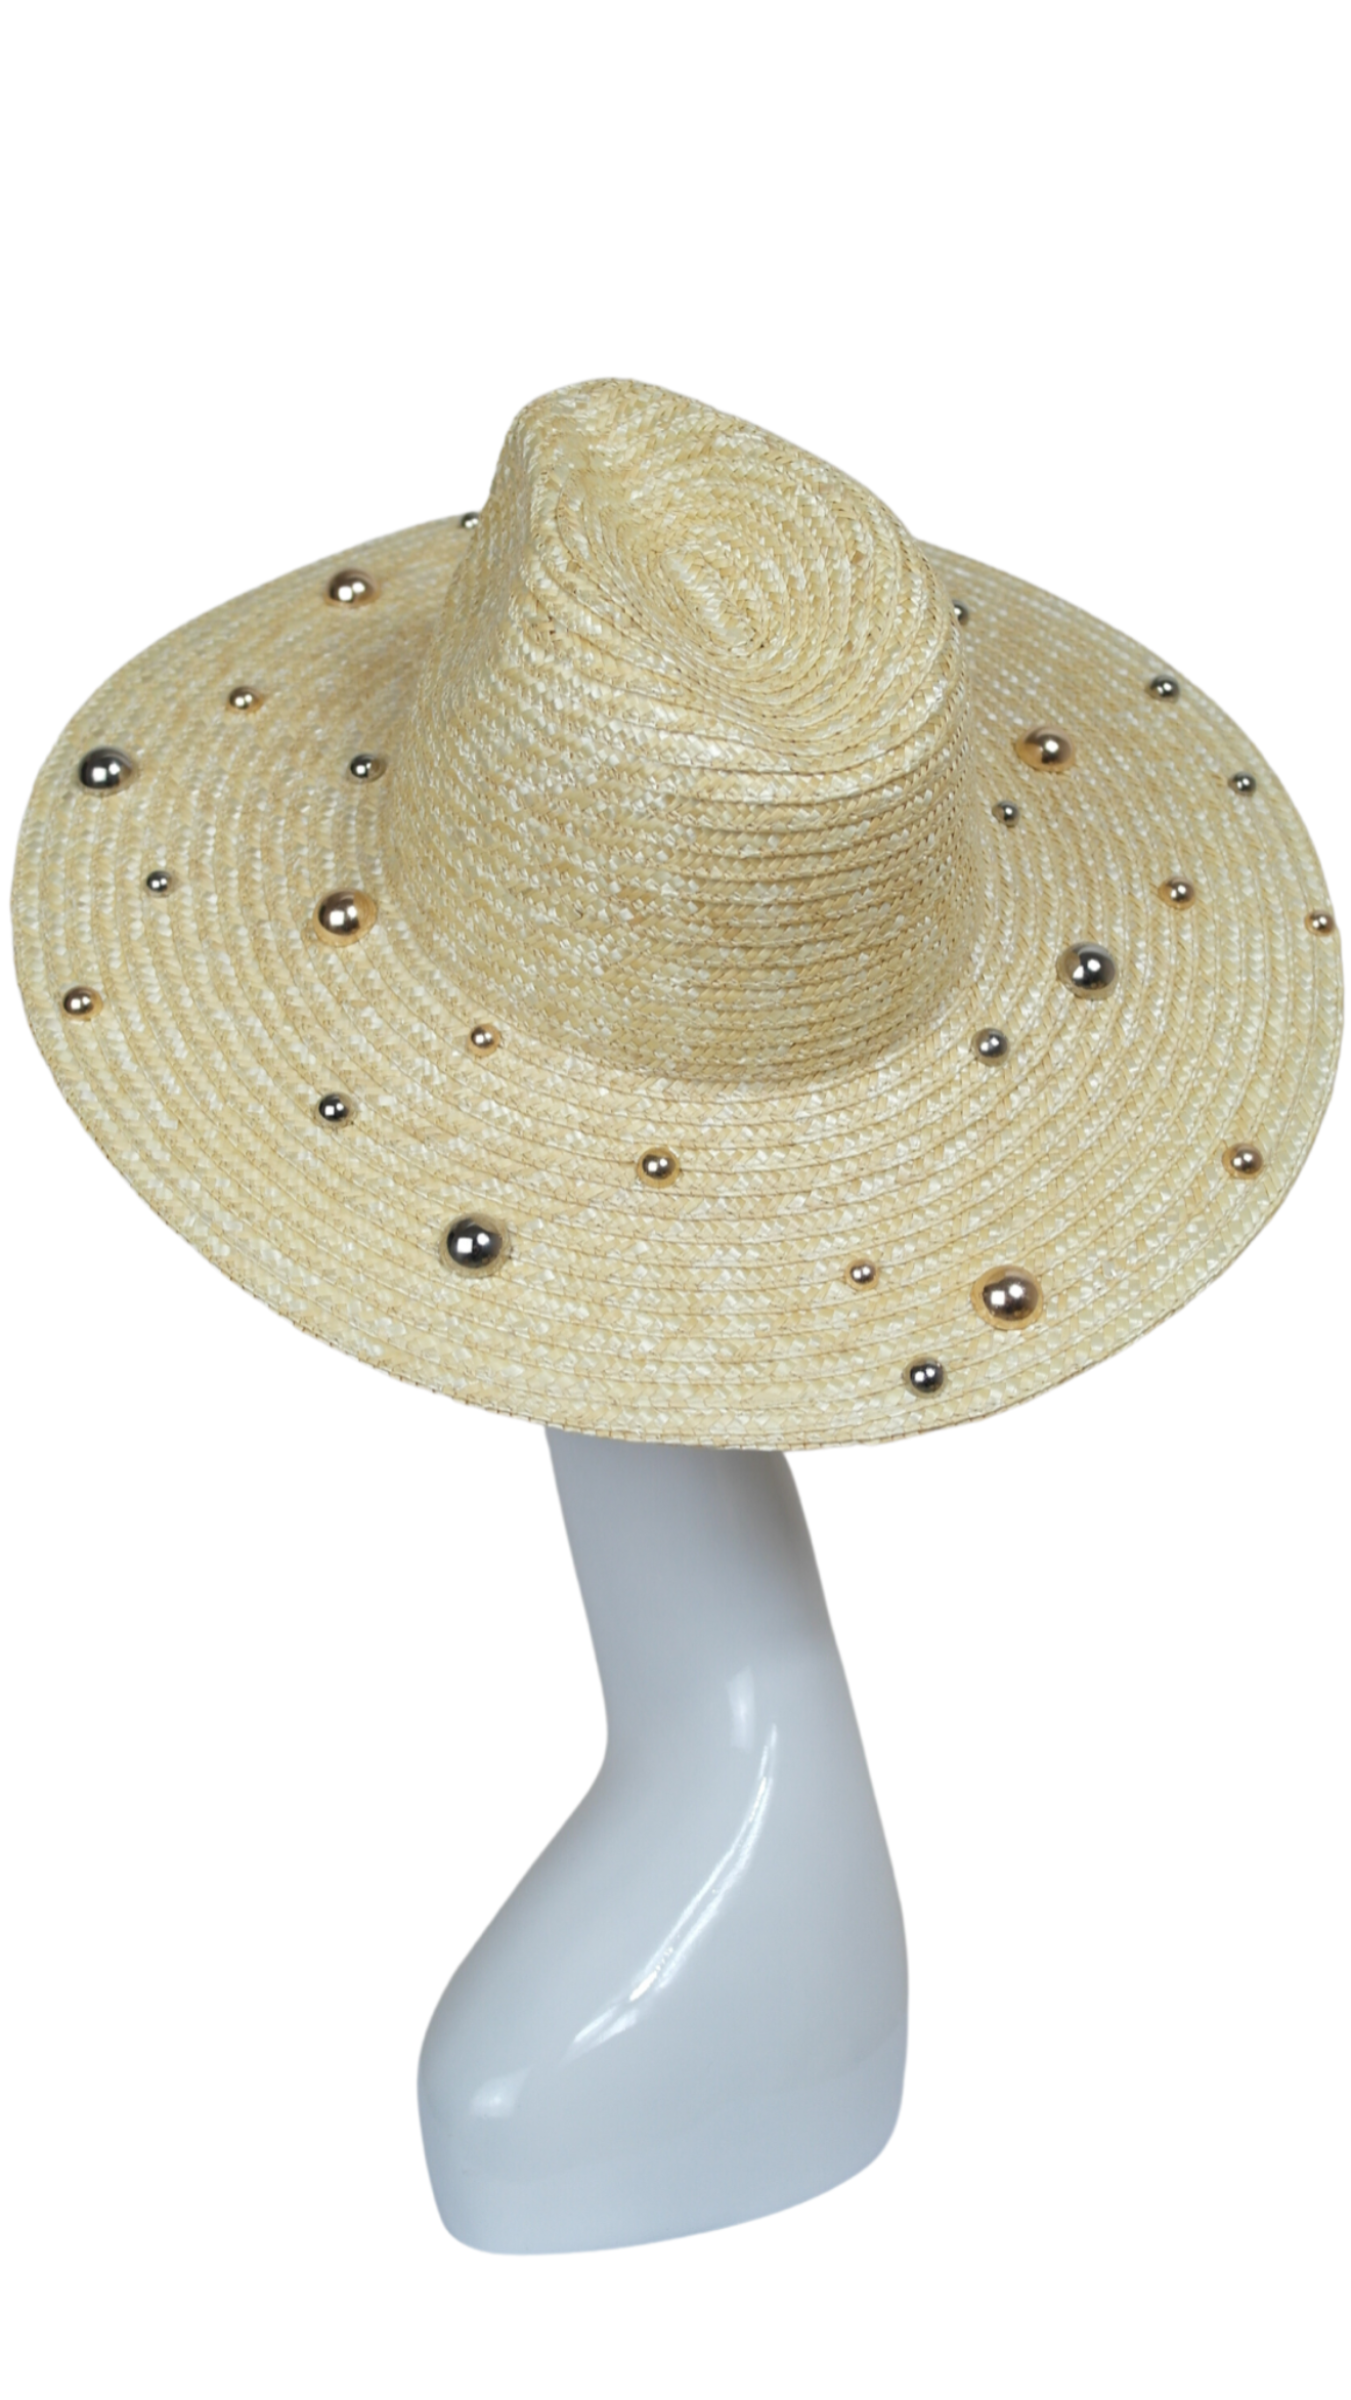 Load image into Gallery viewer, Amara mixed metal sun hat
